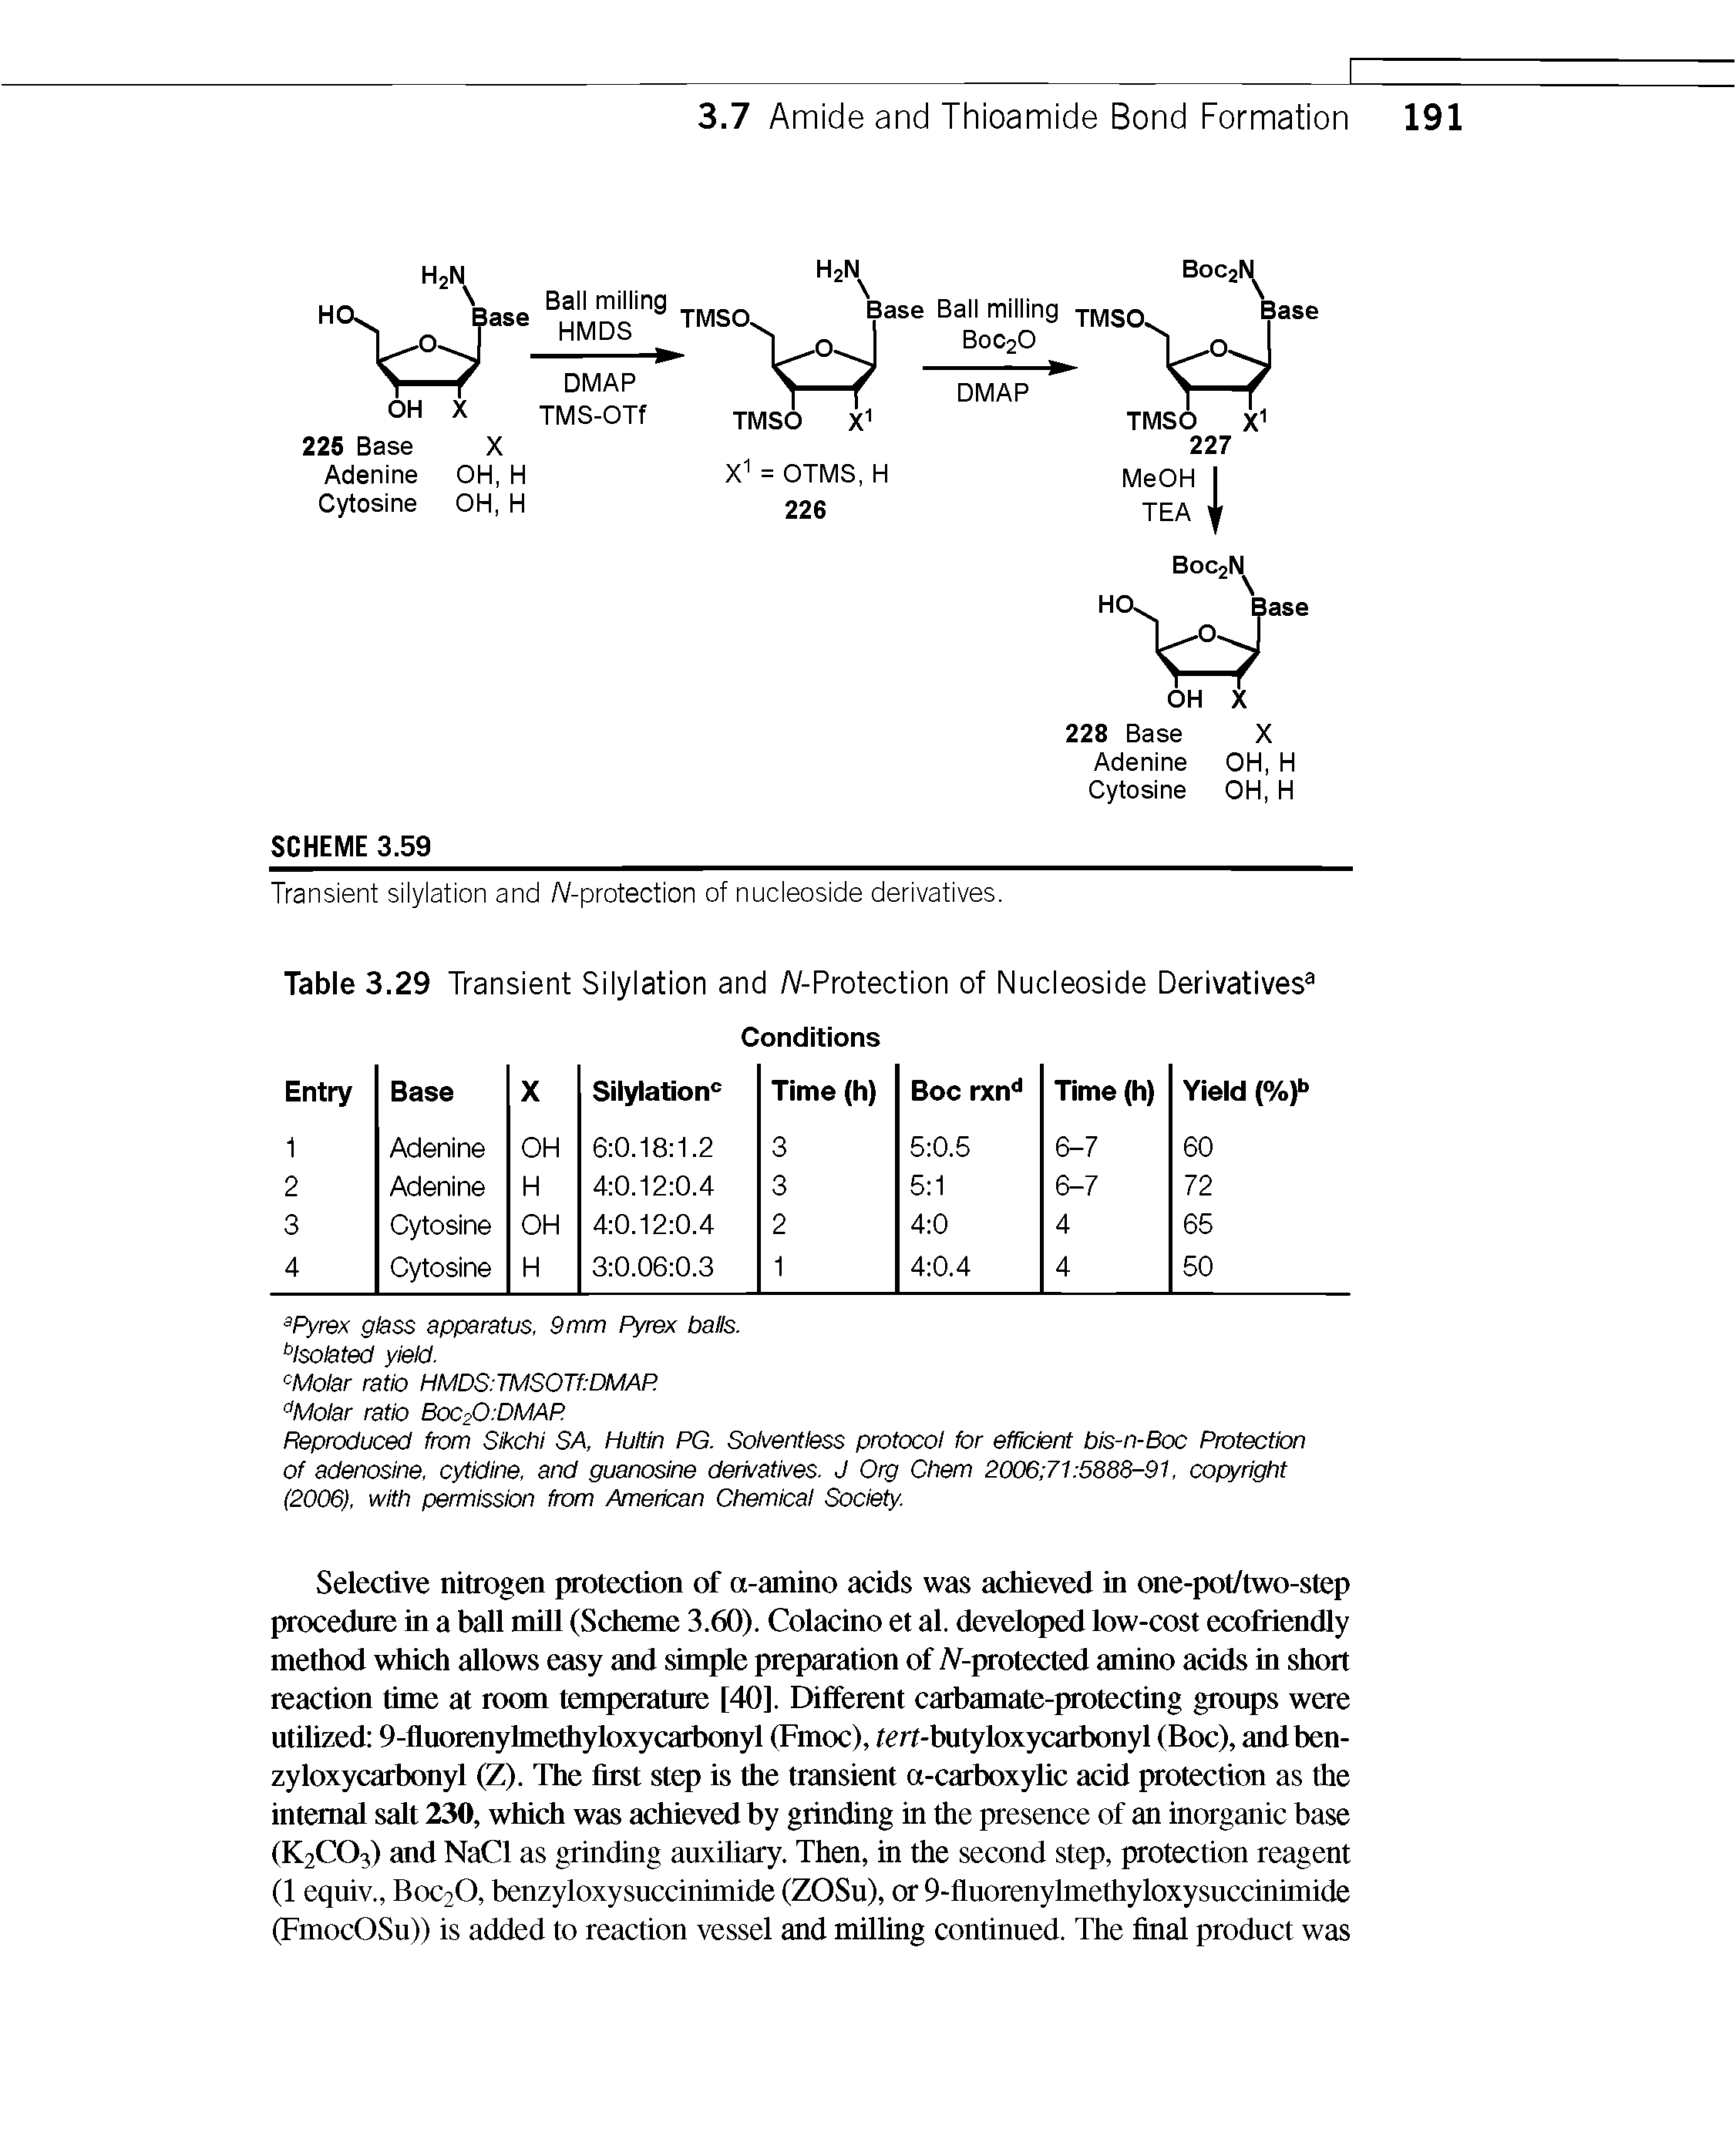 Table 3.29 Transient Silylation and /V-Protection of Nucleoside Derivatives ...